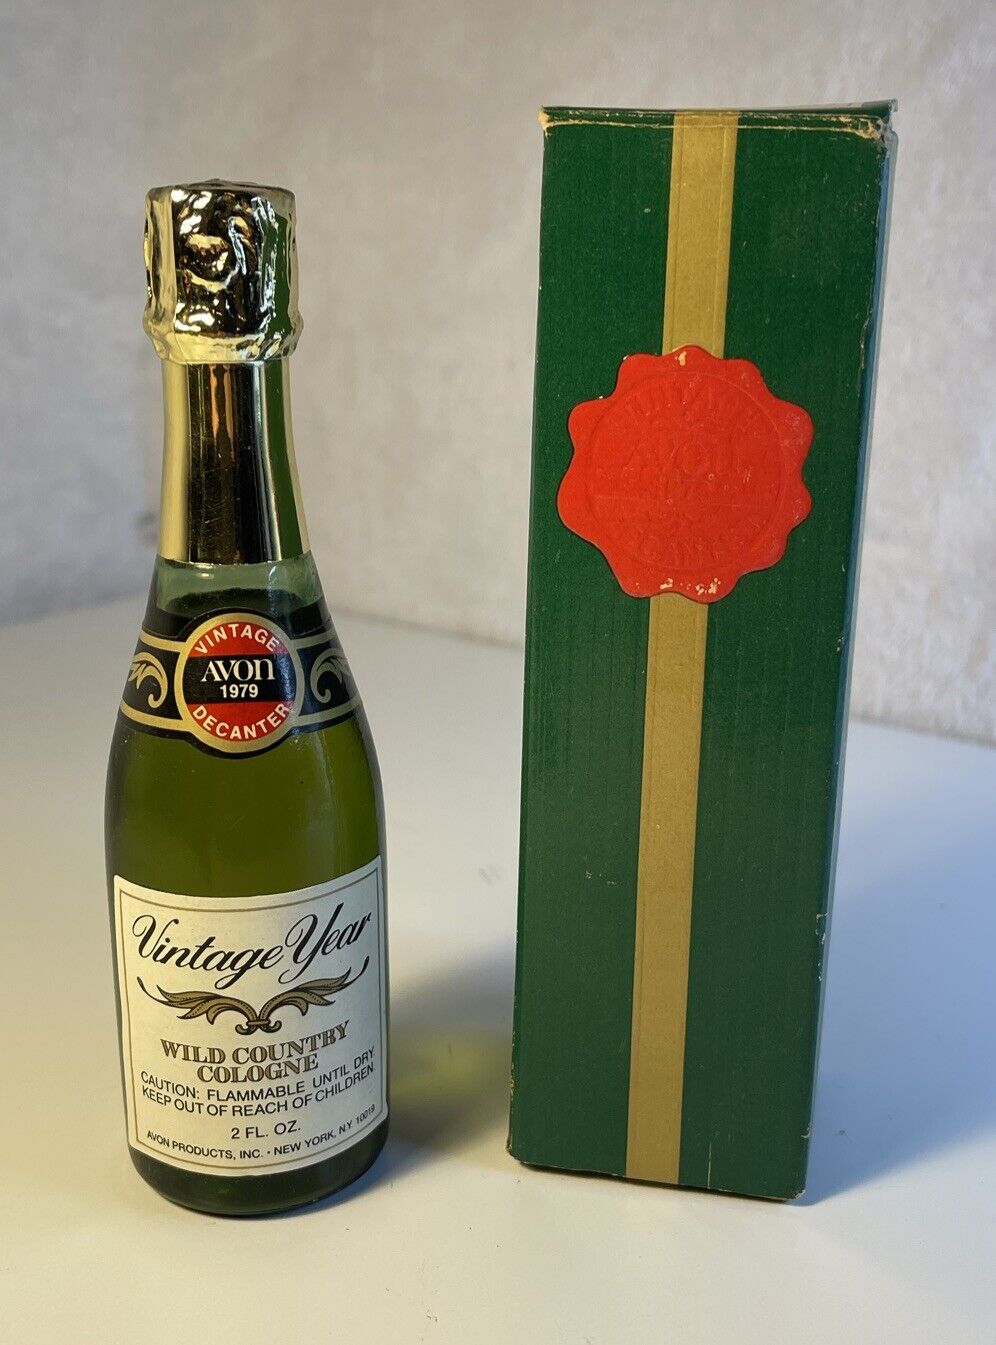 New Avon VINTAGE YEAR DECANTER  Wild Country Cologne Bottle 2 fl oz With Box